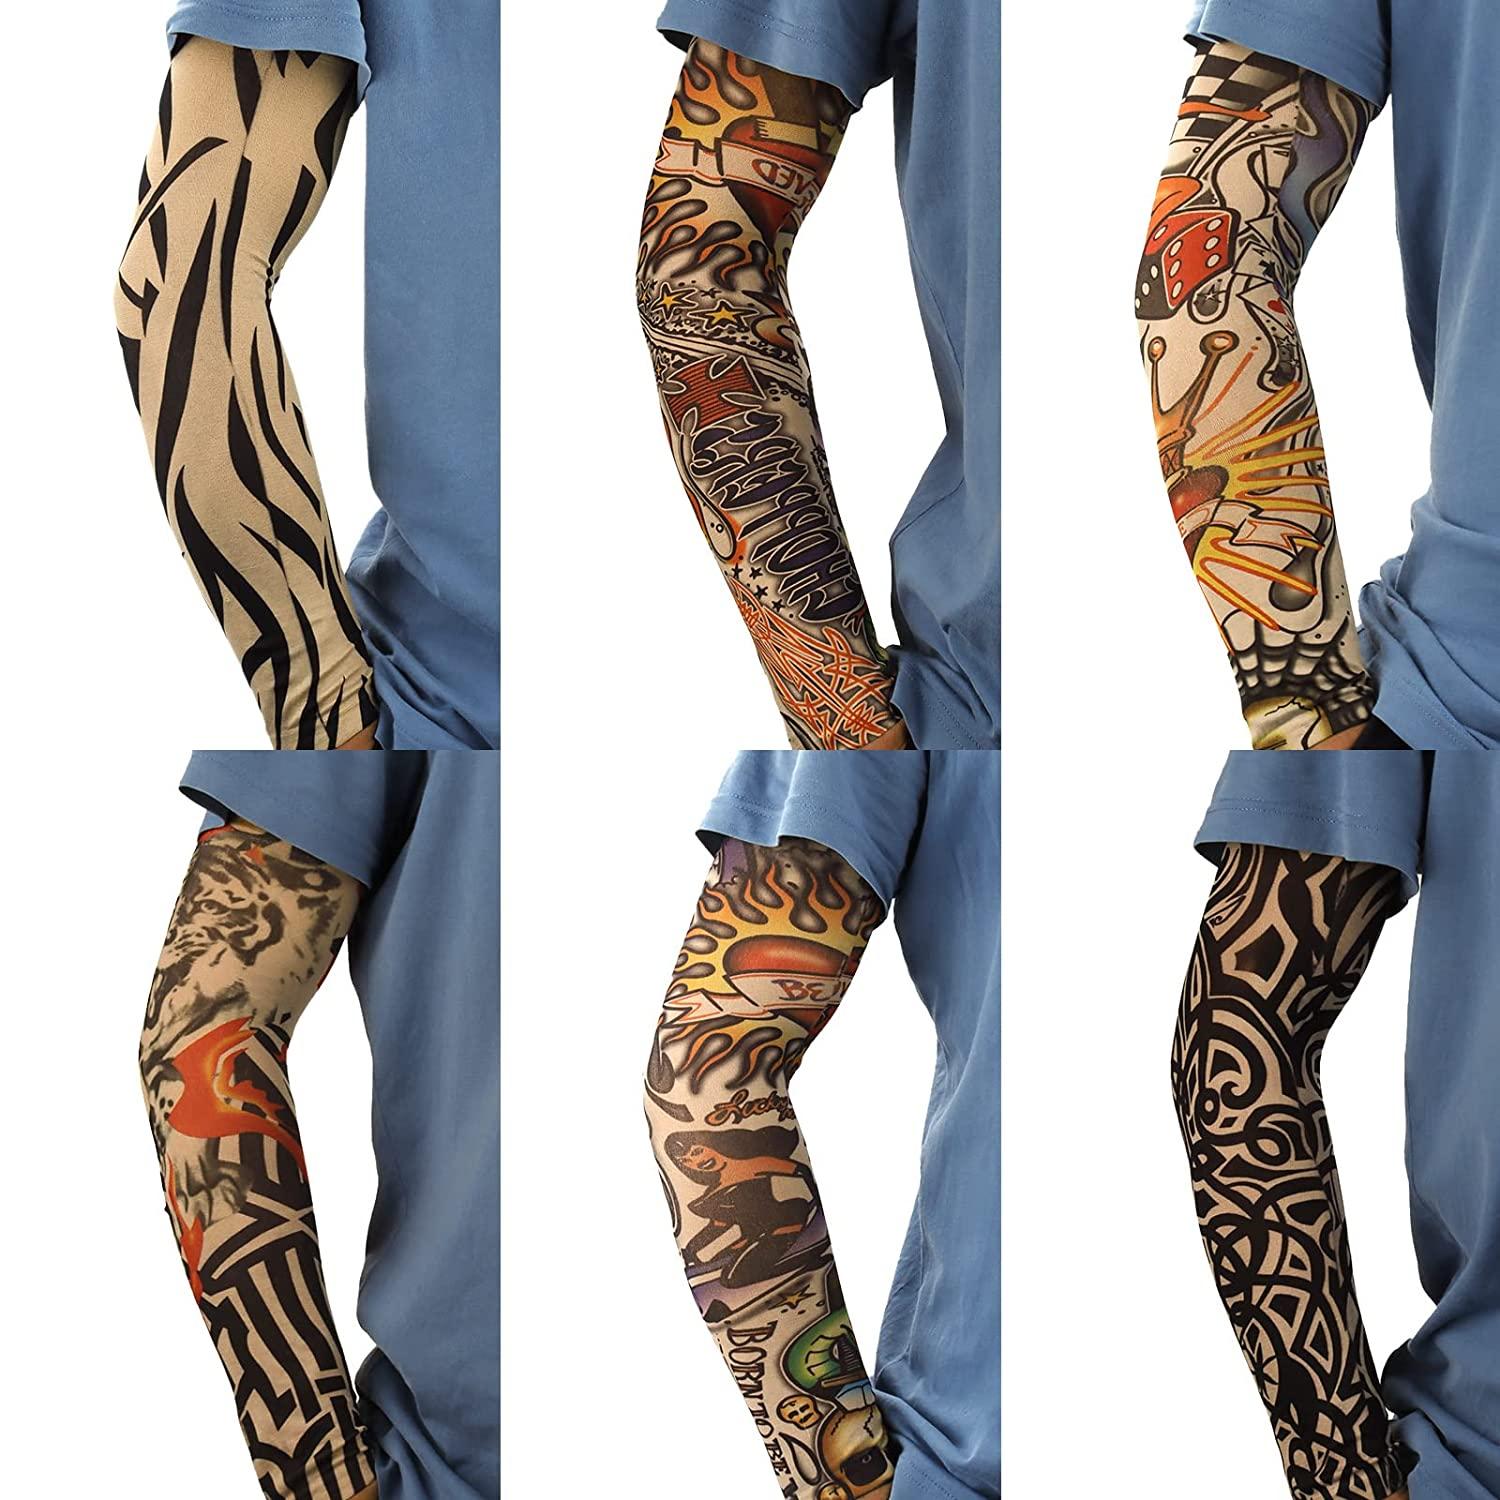 Tattoo Sleeves for MenYARIEW 6Pcs Arm Sleeves Fake Tattoos Sleeves to Cover  Arms Sun Protection Sleeves Tattoo Sleeve Covers Tattoo Cover Up Sleeve  Temporary Tattoo Sleeves for Men and Women (Set 1)